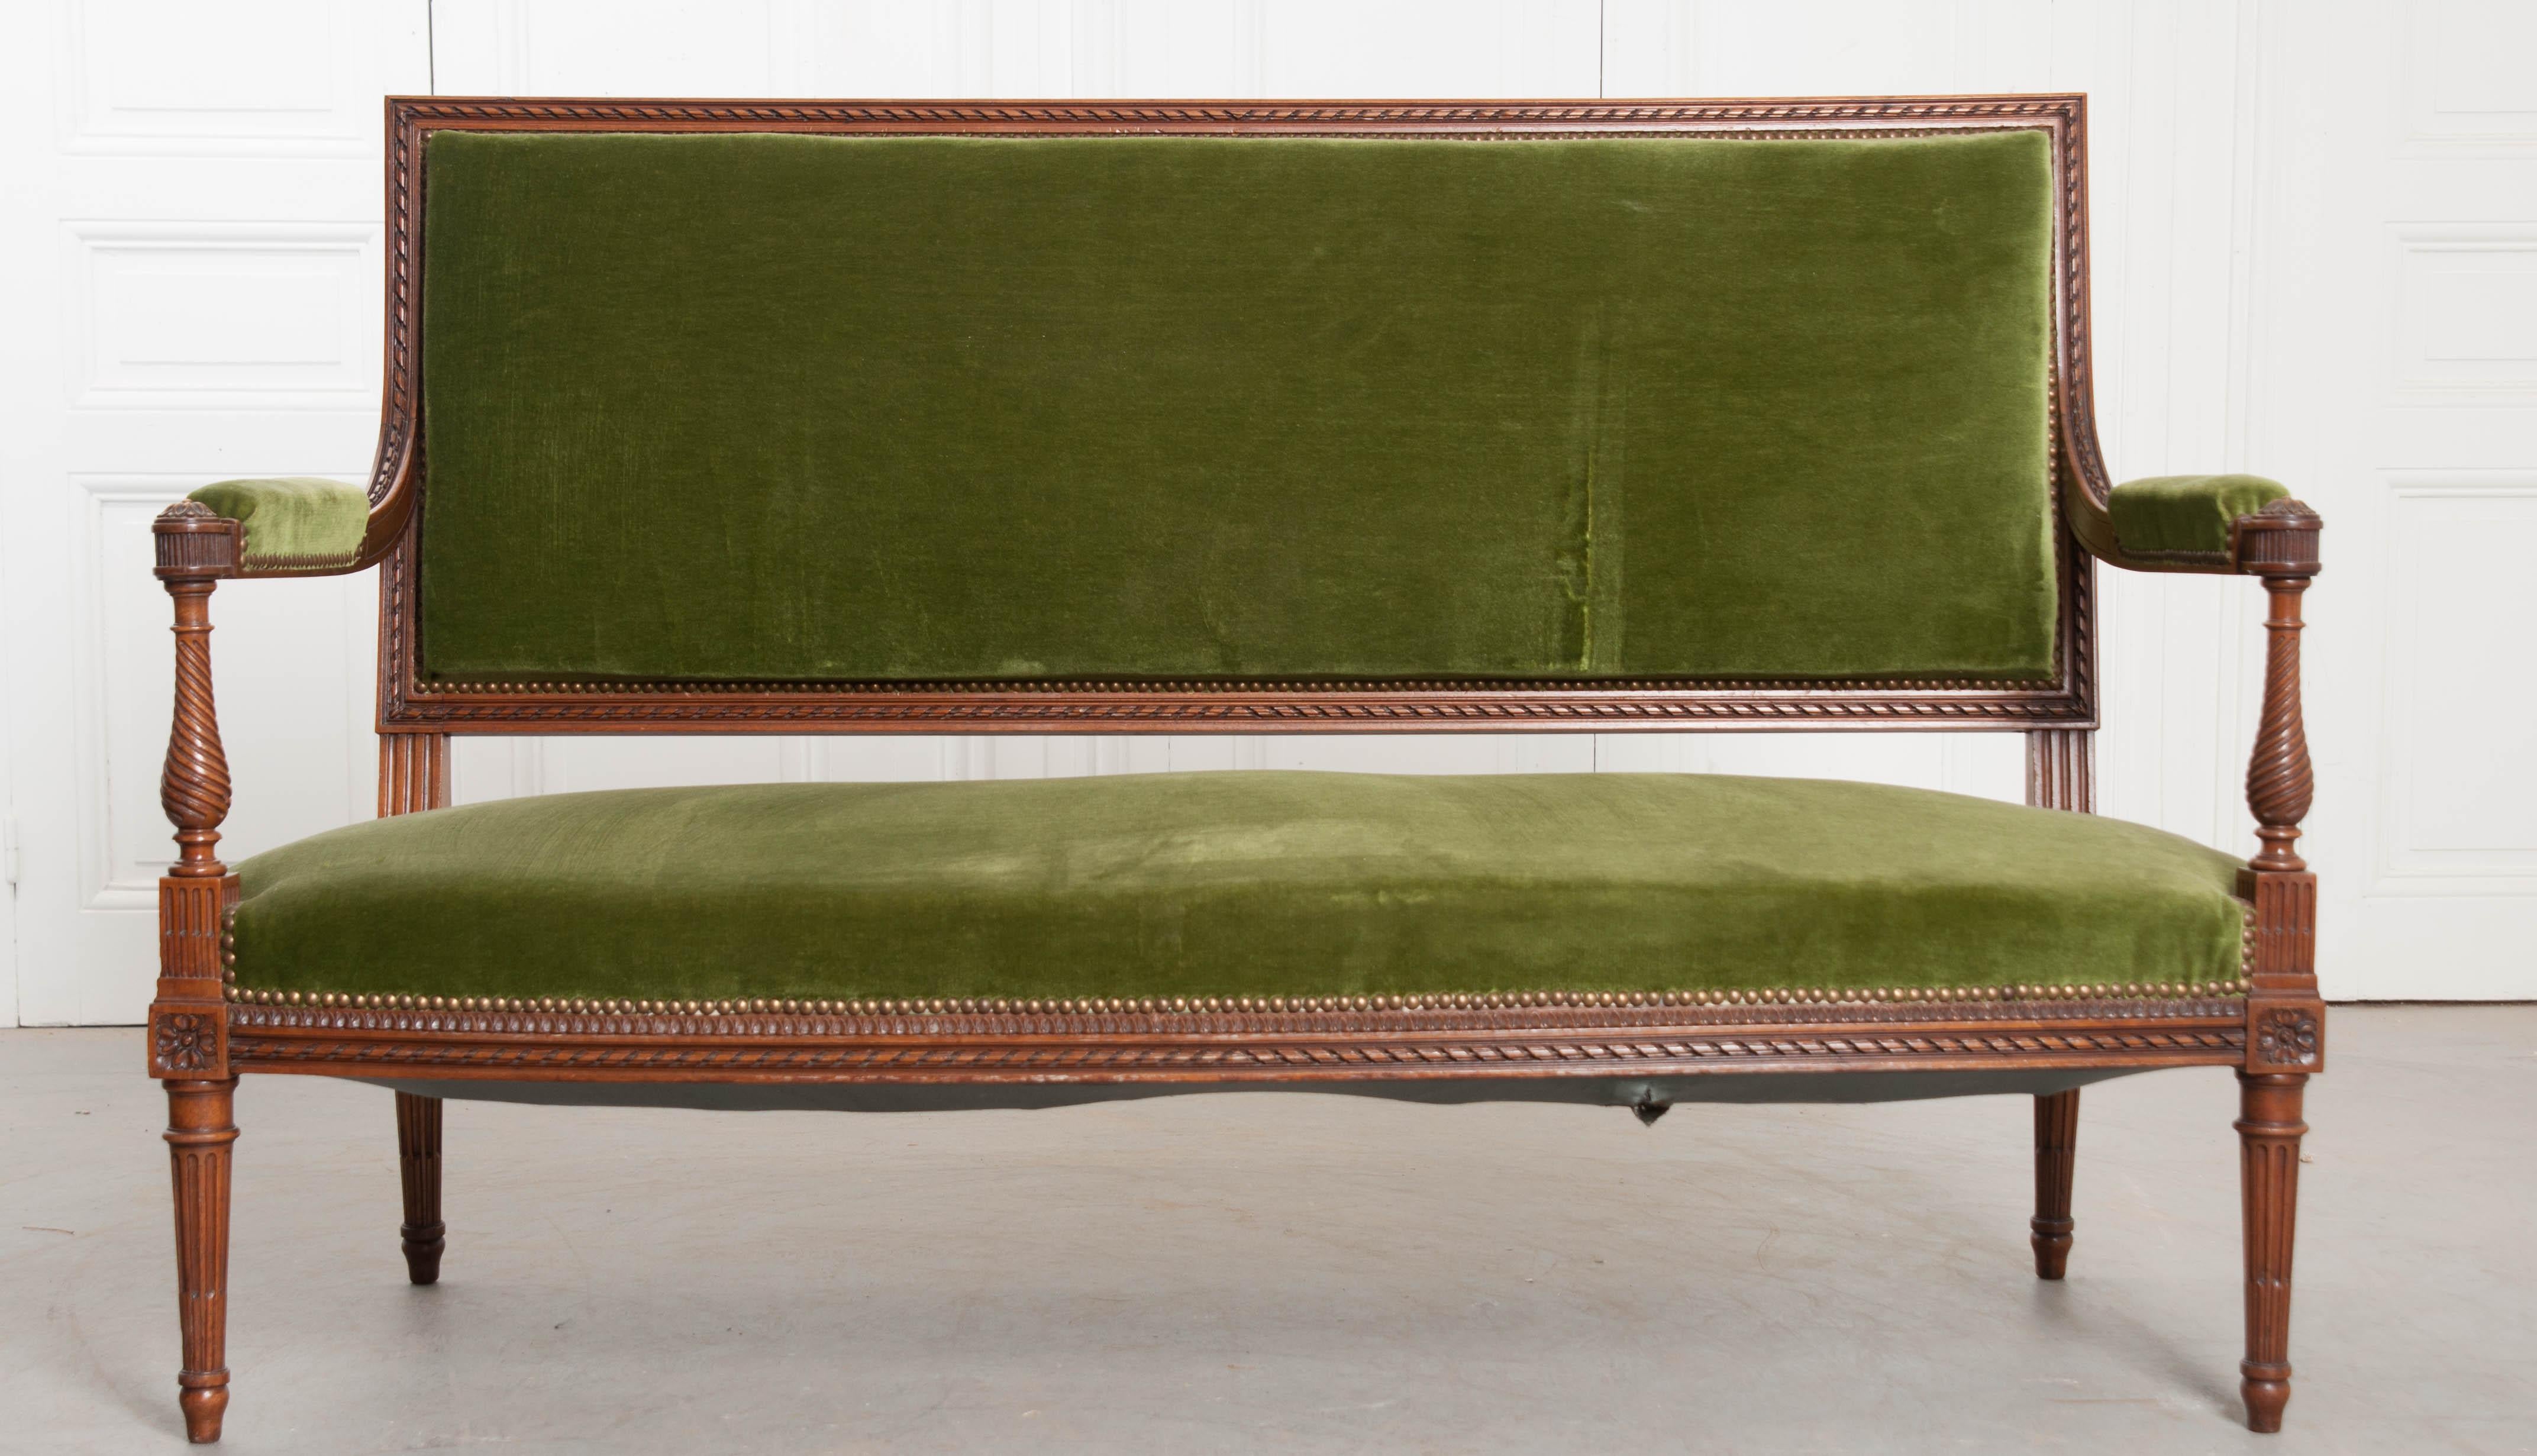 A fabulous green velvet upholstered Louis XVI style walnut settee, made in France, circa 1900. Magnificent carved details embellish nearly every square inch of the walnut frame. A carved, twisted ribbon motif runs the perimeter of the sofa’s back,